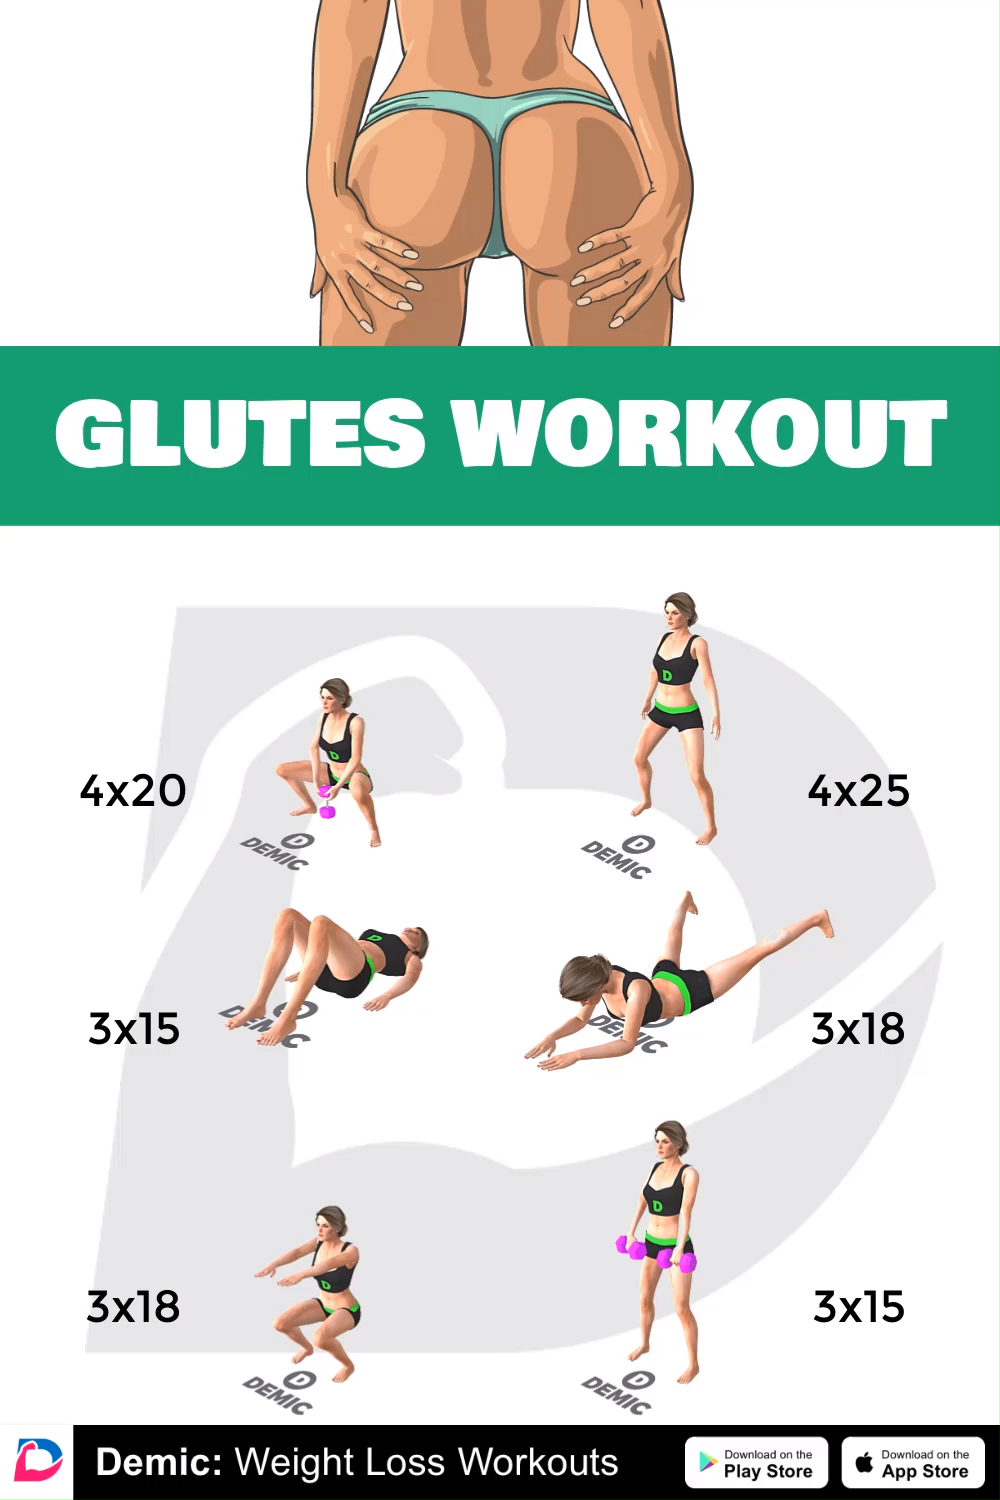 Glutes Workout -   14 fitness workout ideas